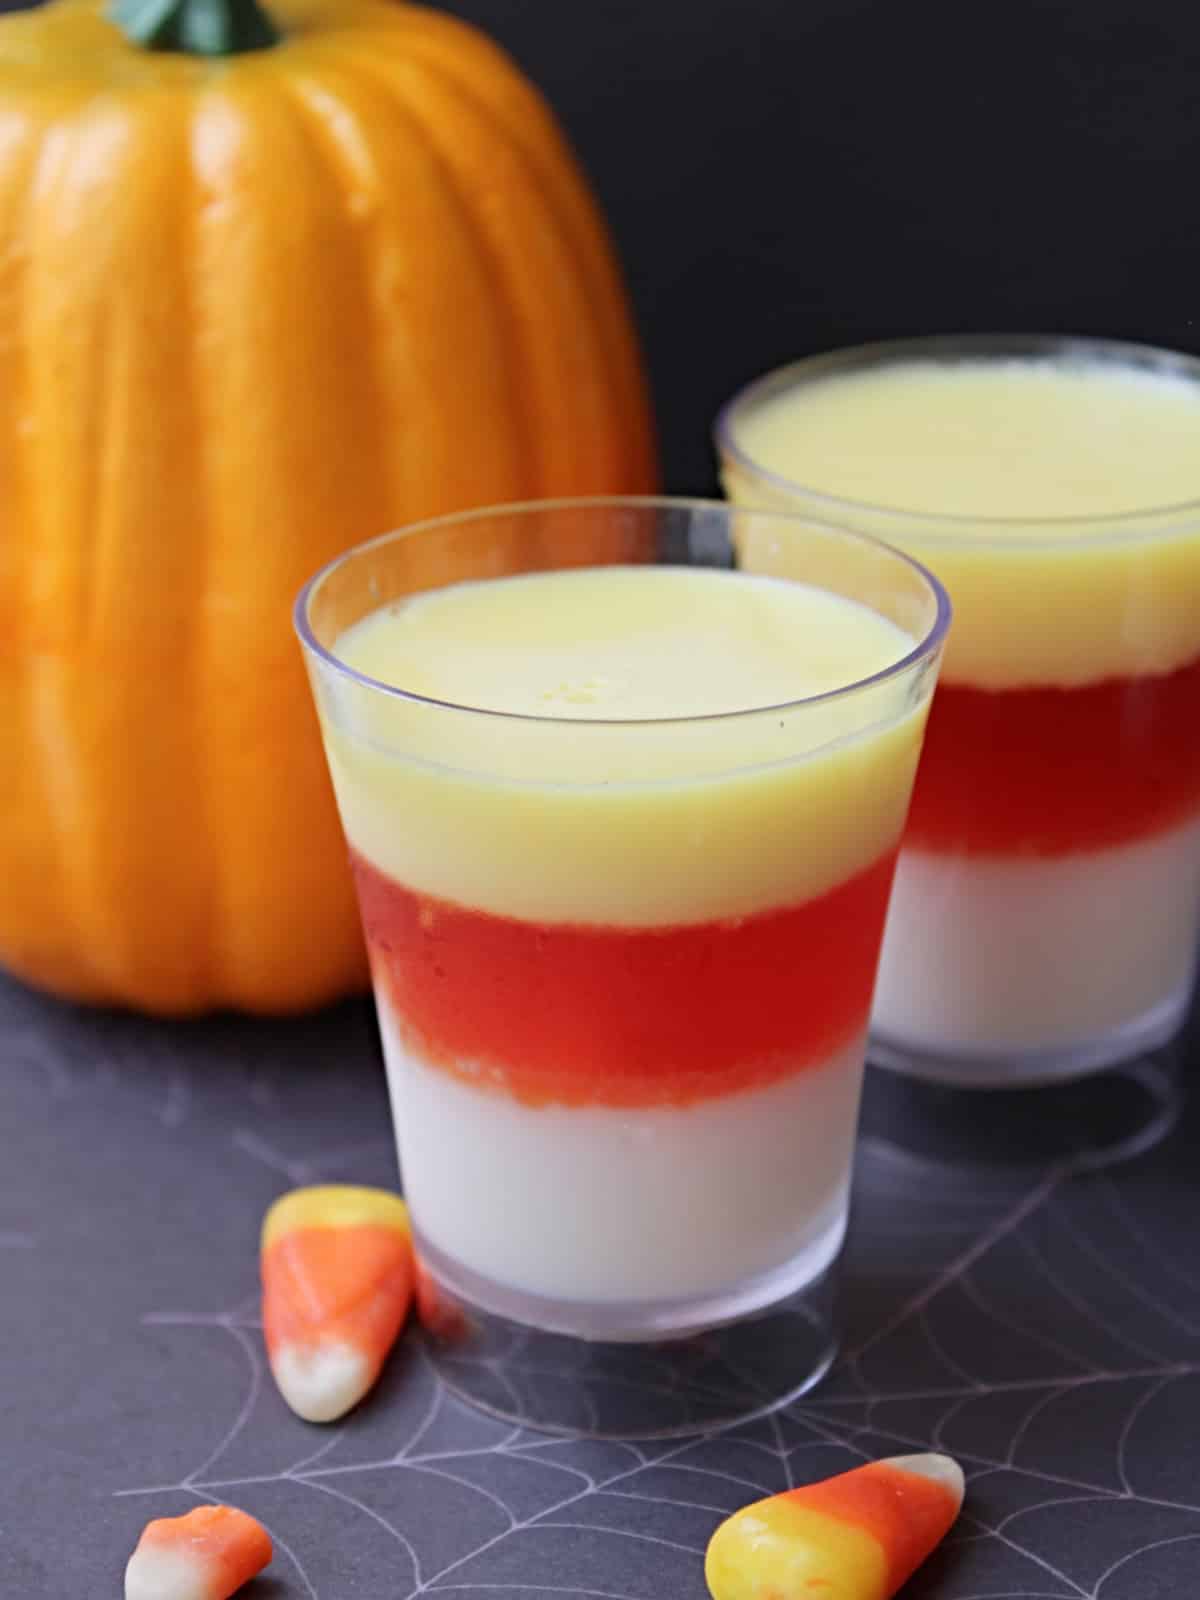 Candy corn Jello shots with or without alcohol